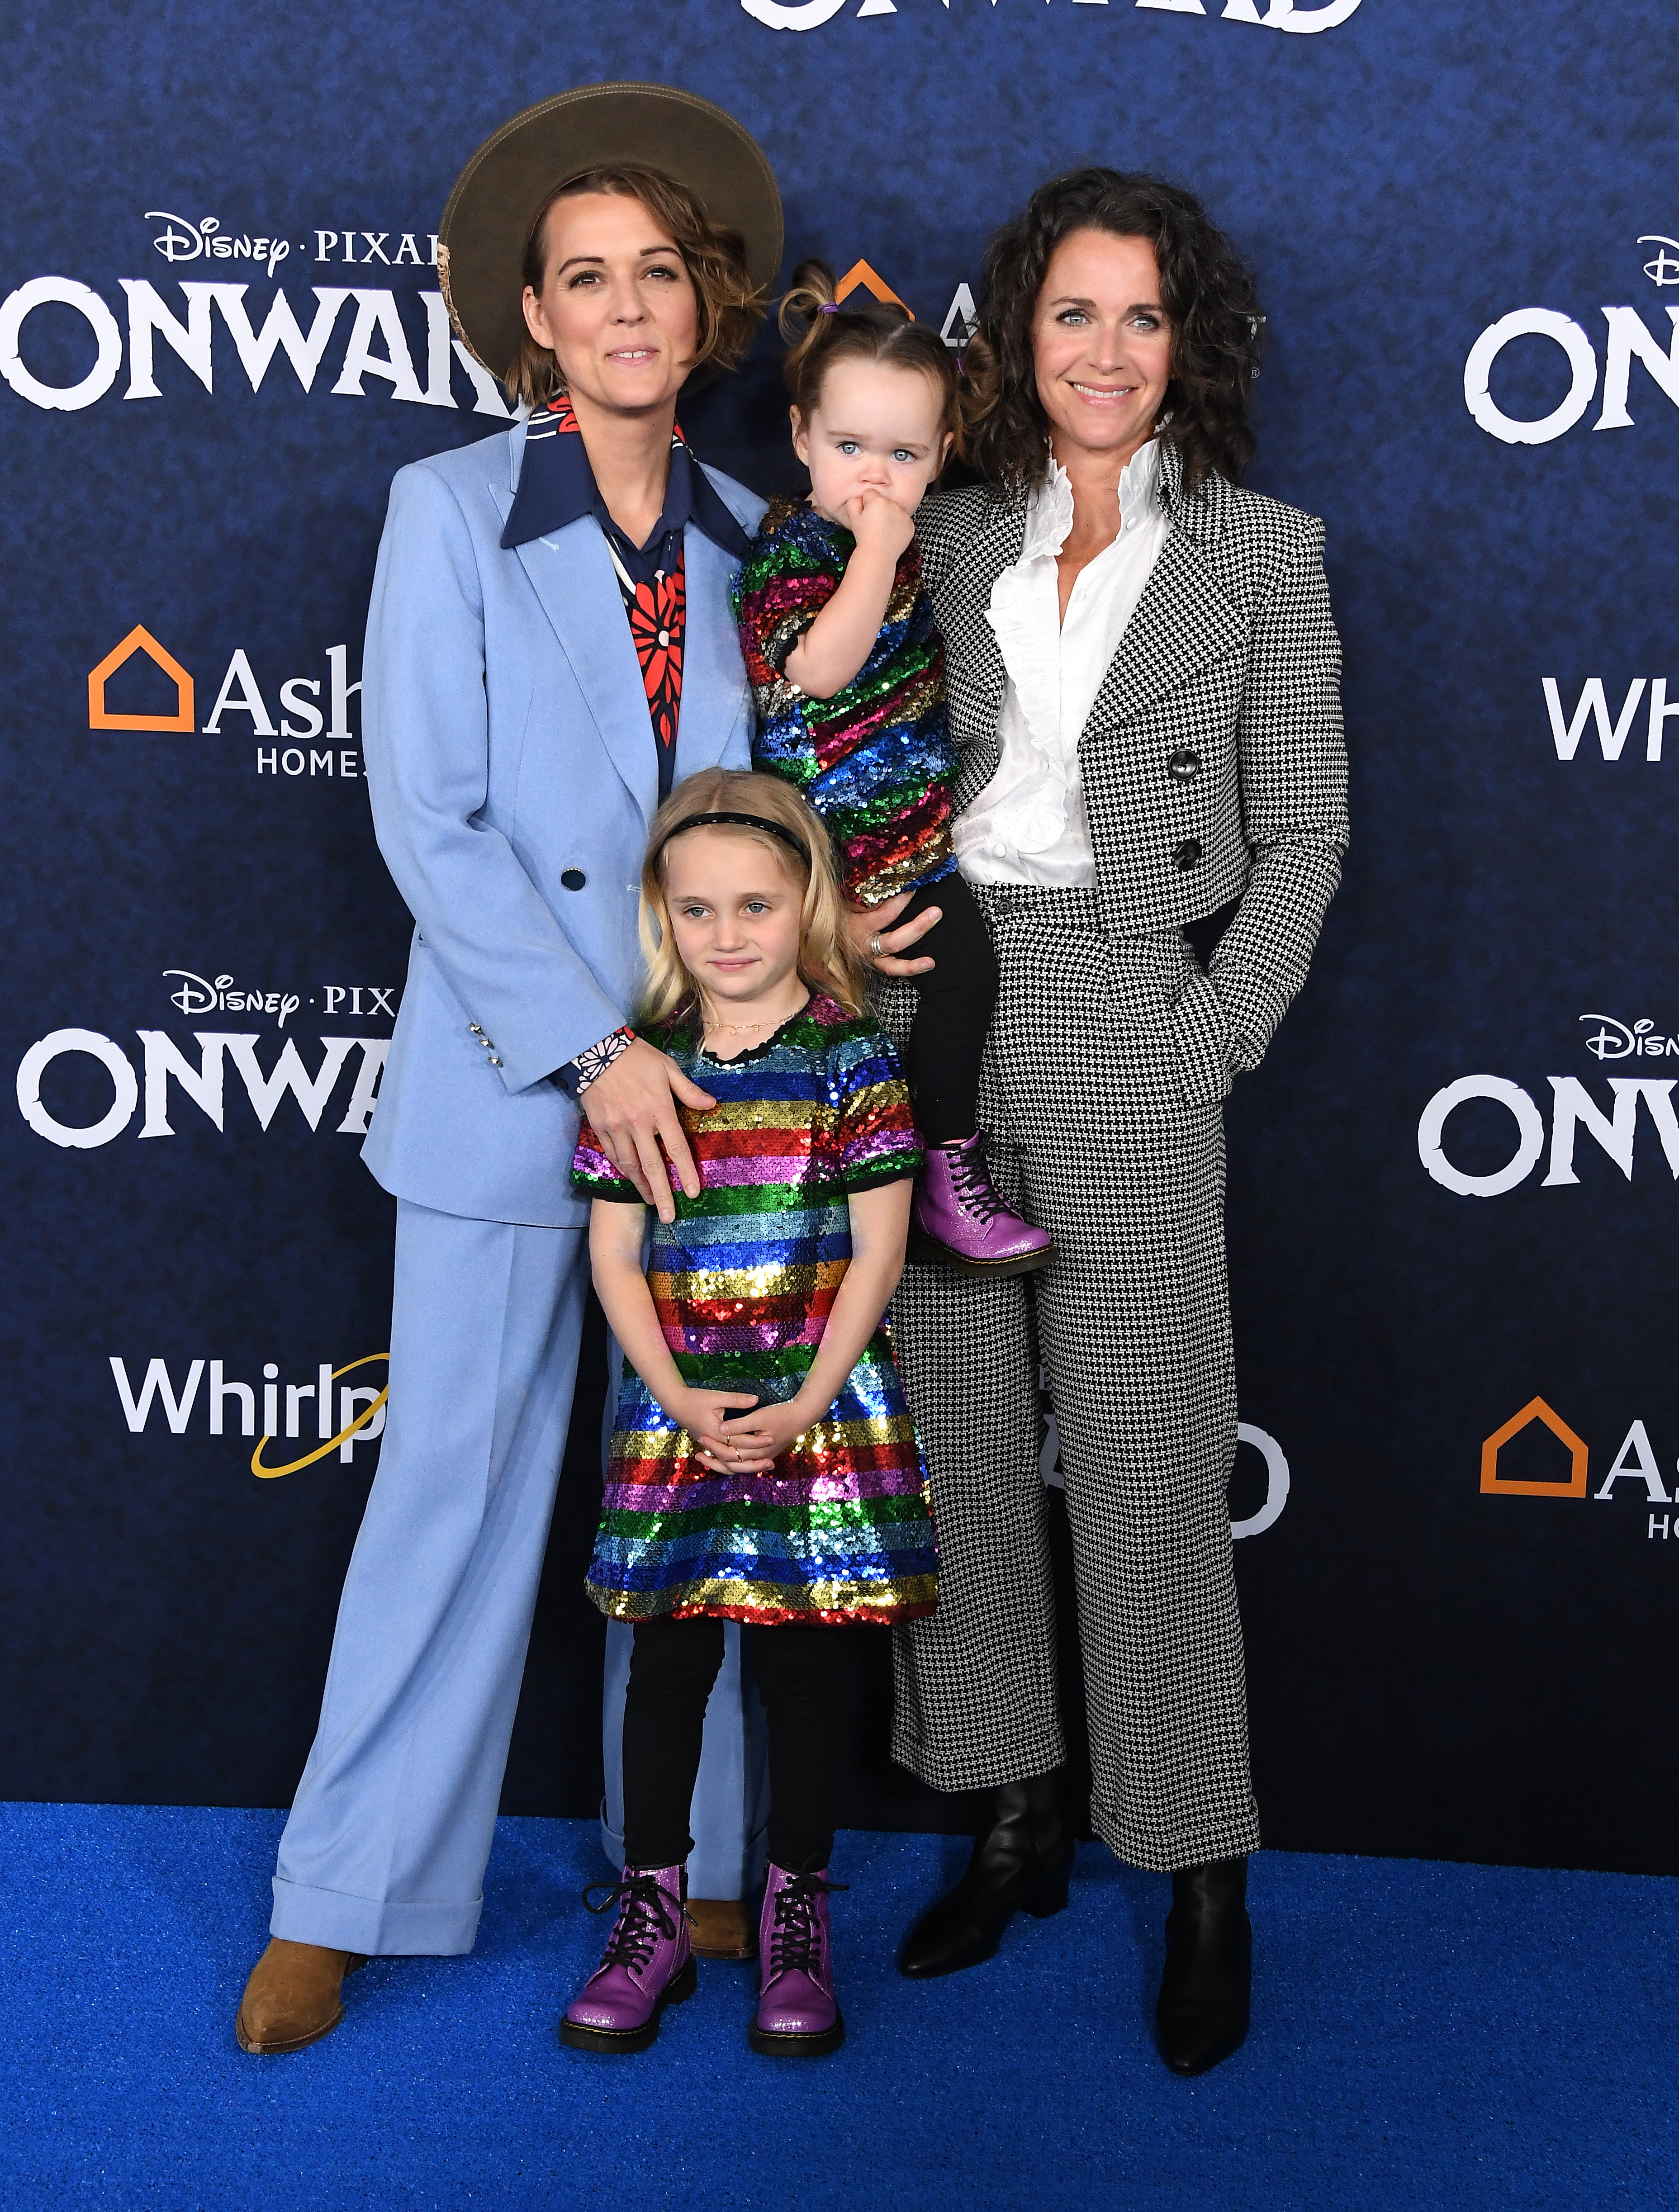 Brandi Carlile, Elijah Carlile, Evangeline Ruth Carlile, and Catherine Shepherd at the premiere of Disney And Pixar's "Onward" on February 18, 2020, in Hollywood, California. | Source: Getty Images